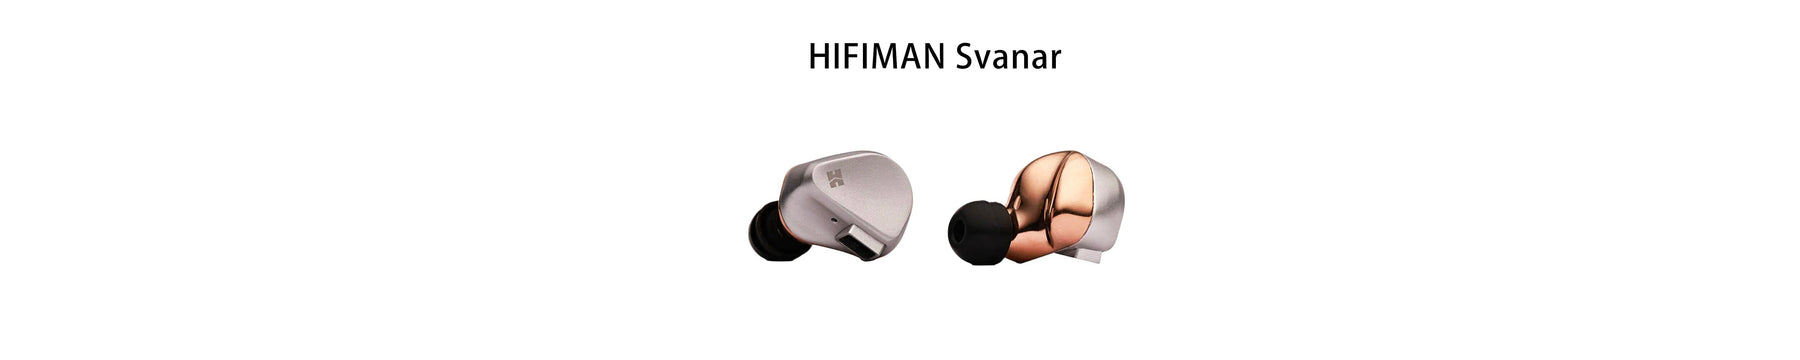 HIFIMAN Svanar: Brand New Flagship IEMs with 9.2mm Topology Diaphragm & Gold-Plated Brass Chamber Design